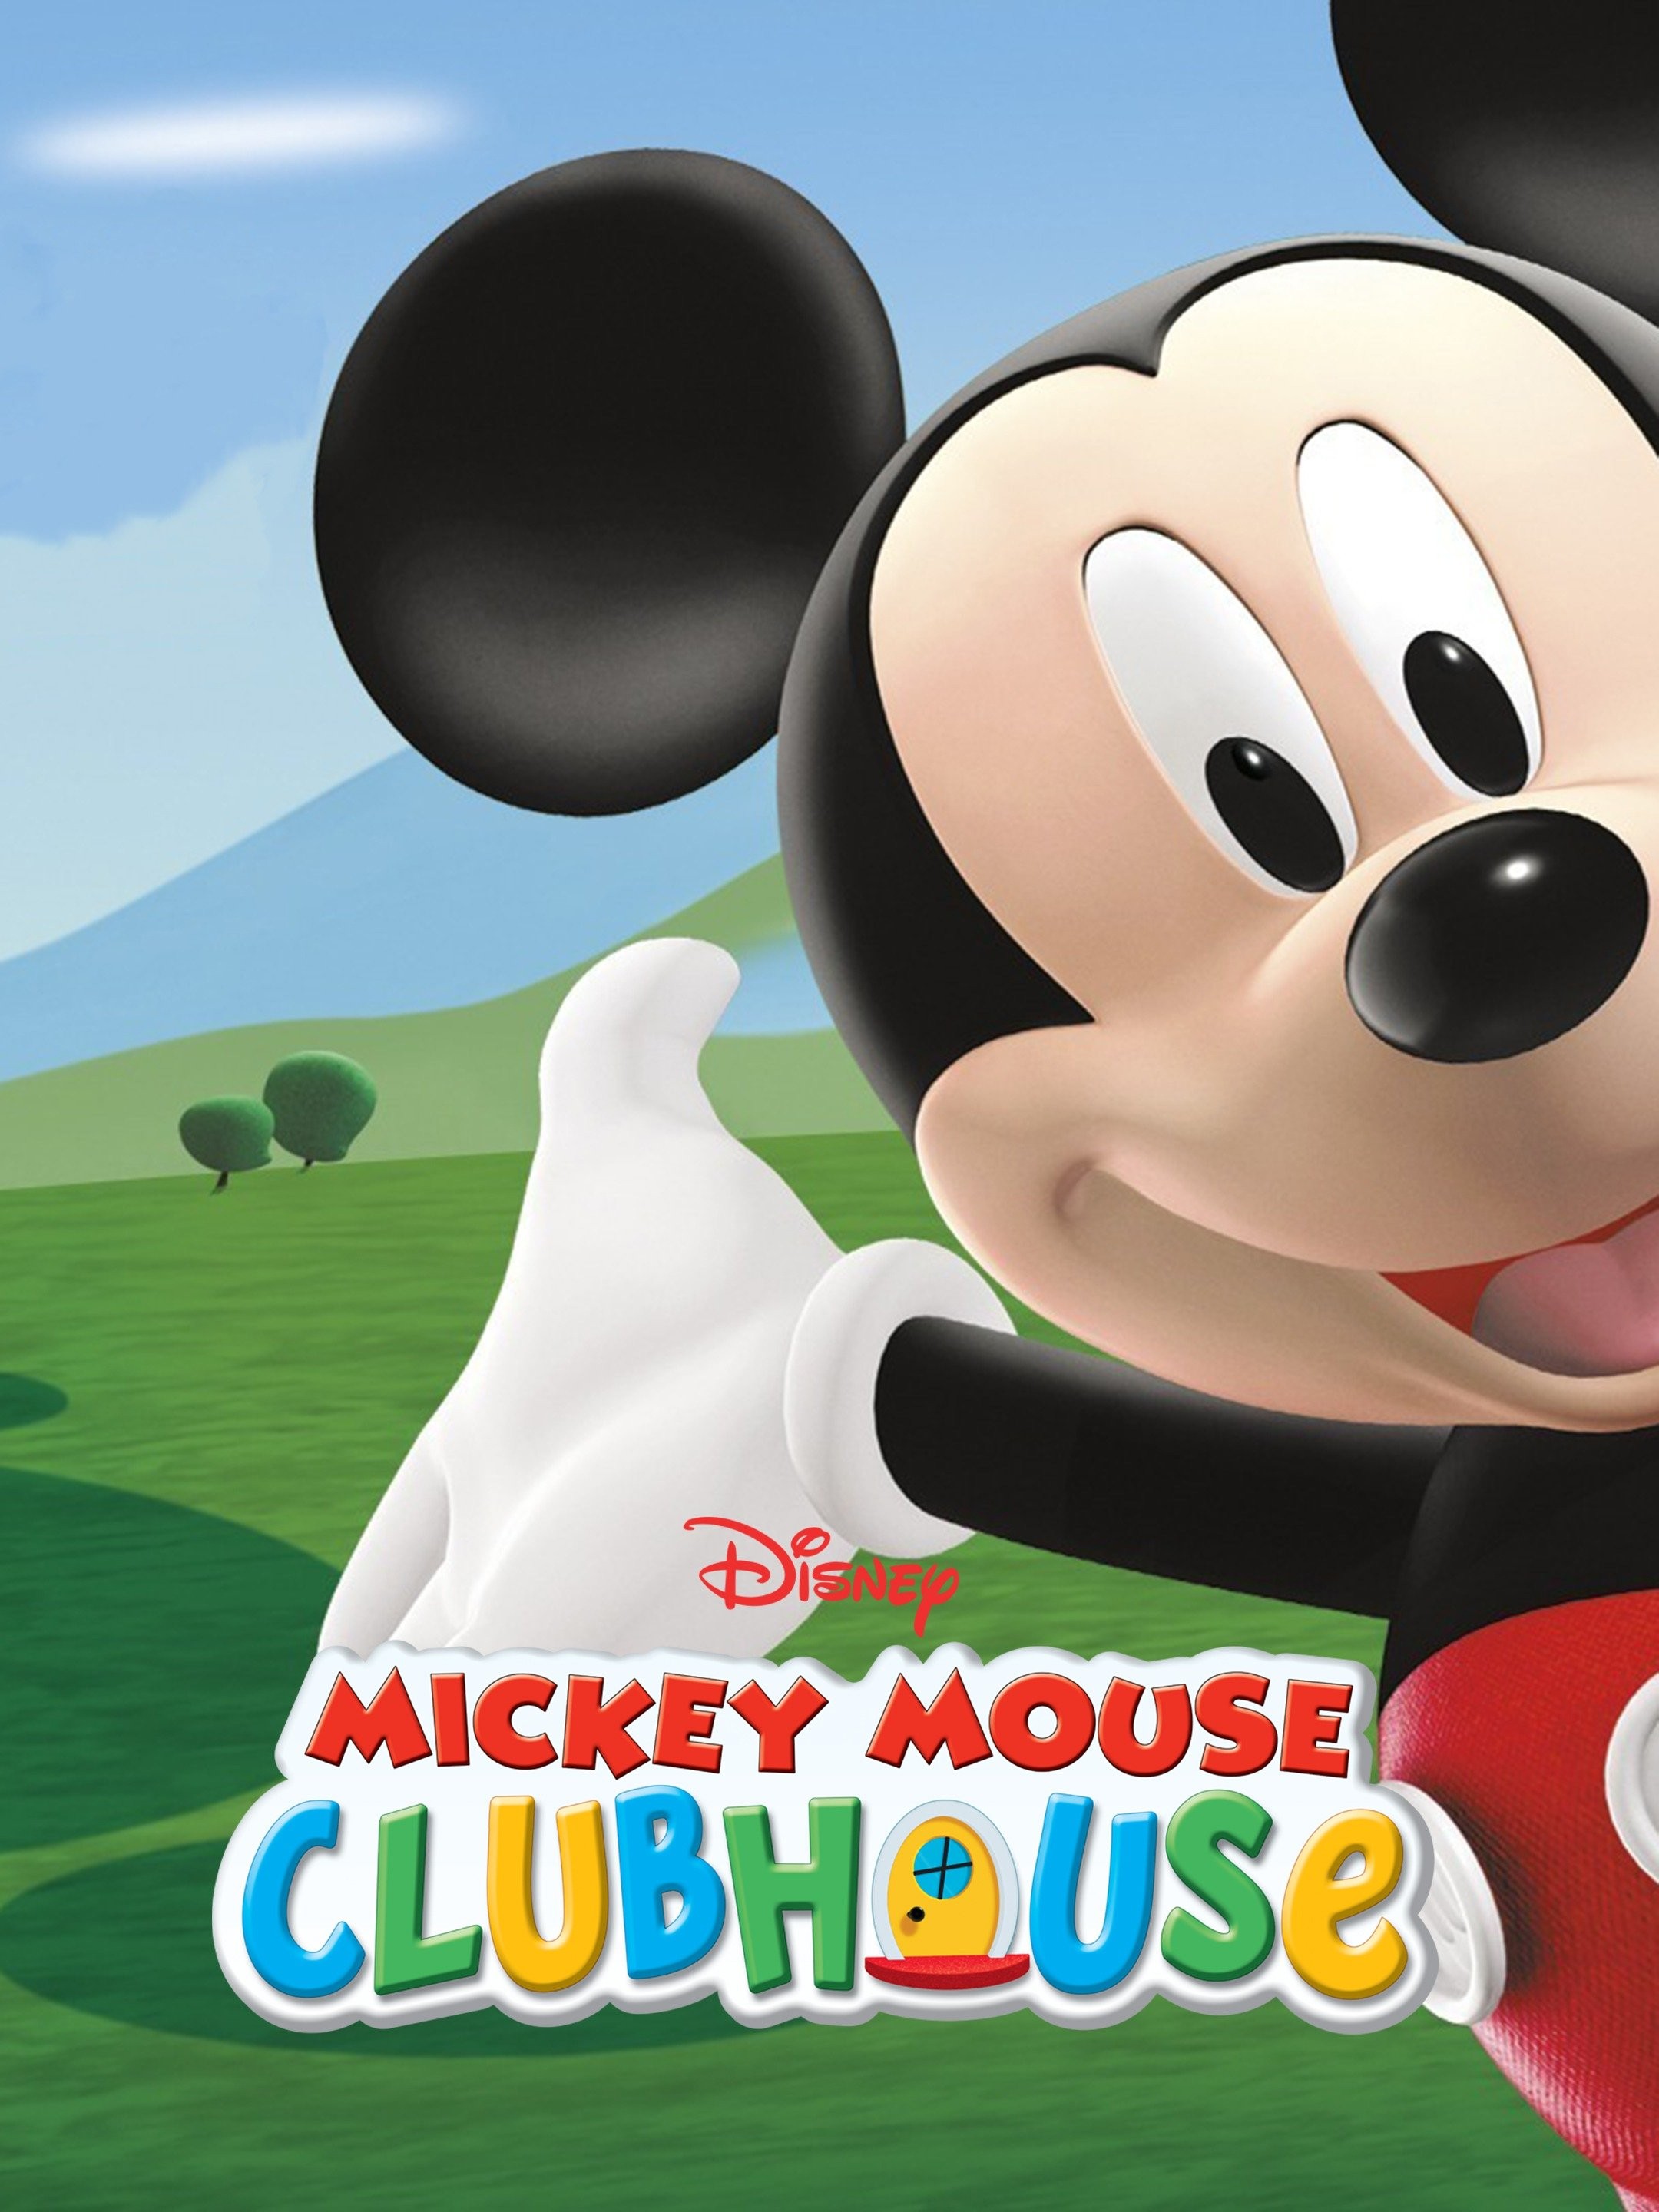 Mickey Mouse Clubhouse Games - Mickey's Farmyard Fun Full Episodes